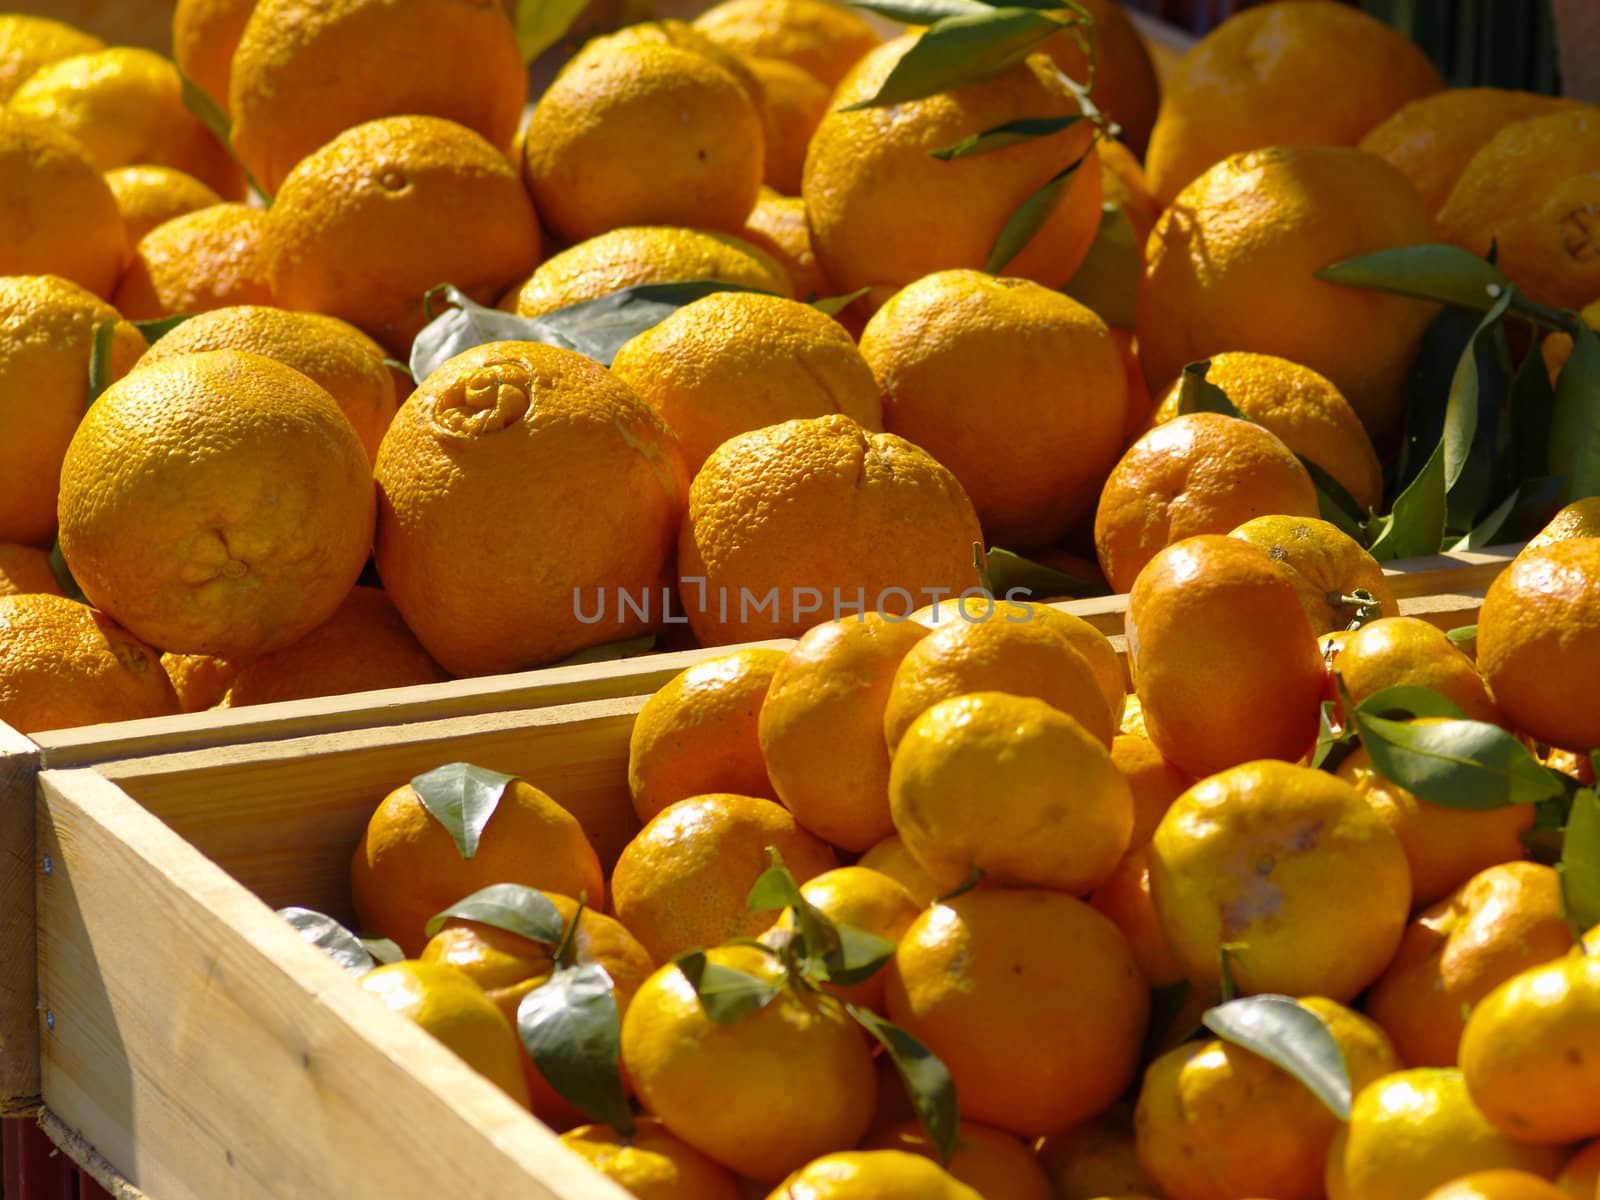 tangerines and oranges by derausdo